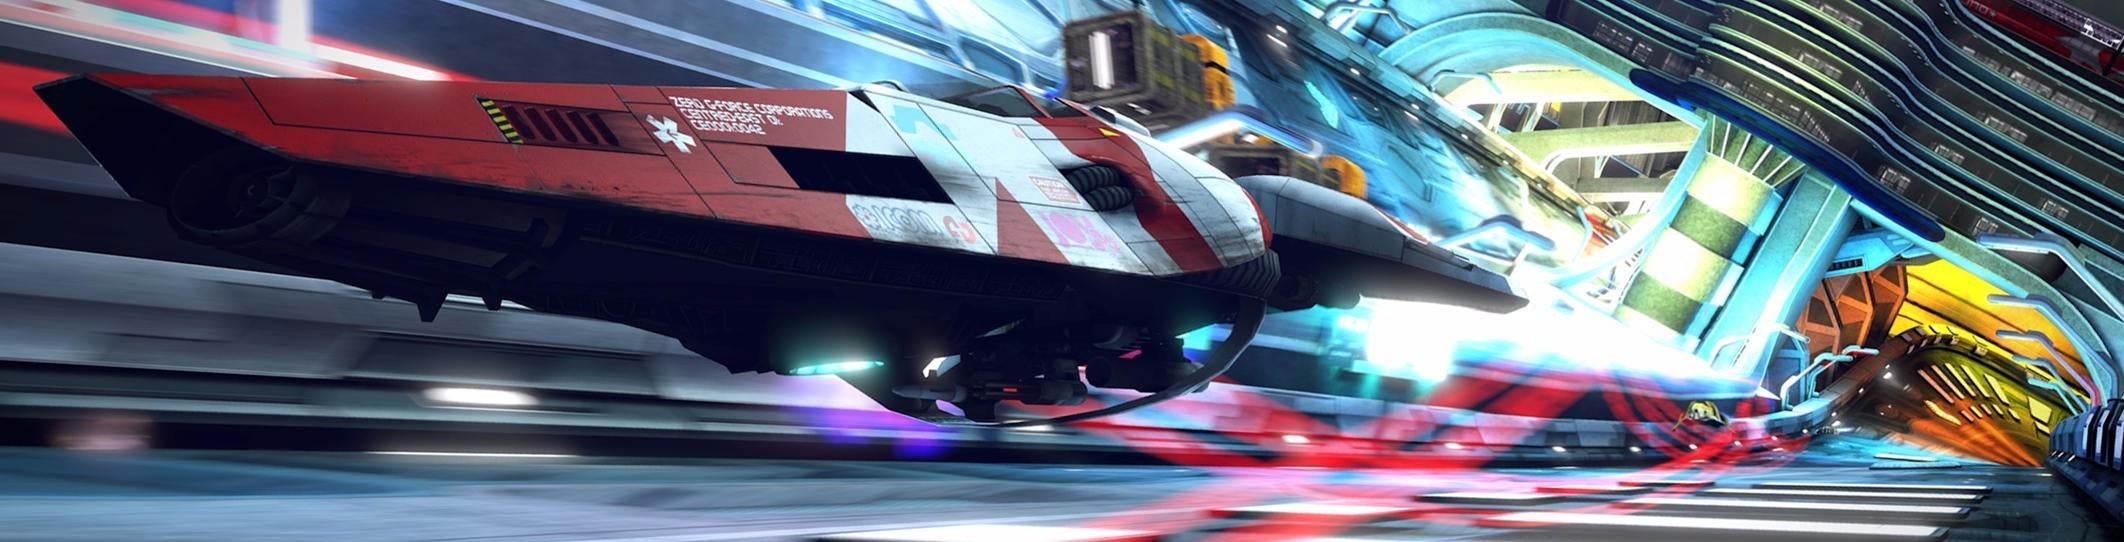 Image for WipEout at 4K 60fps is PS4 Pro at its best